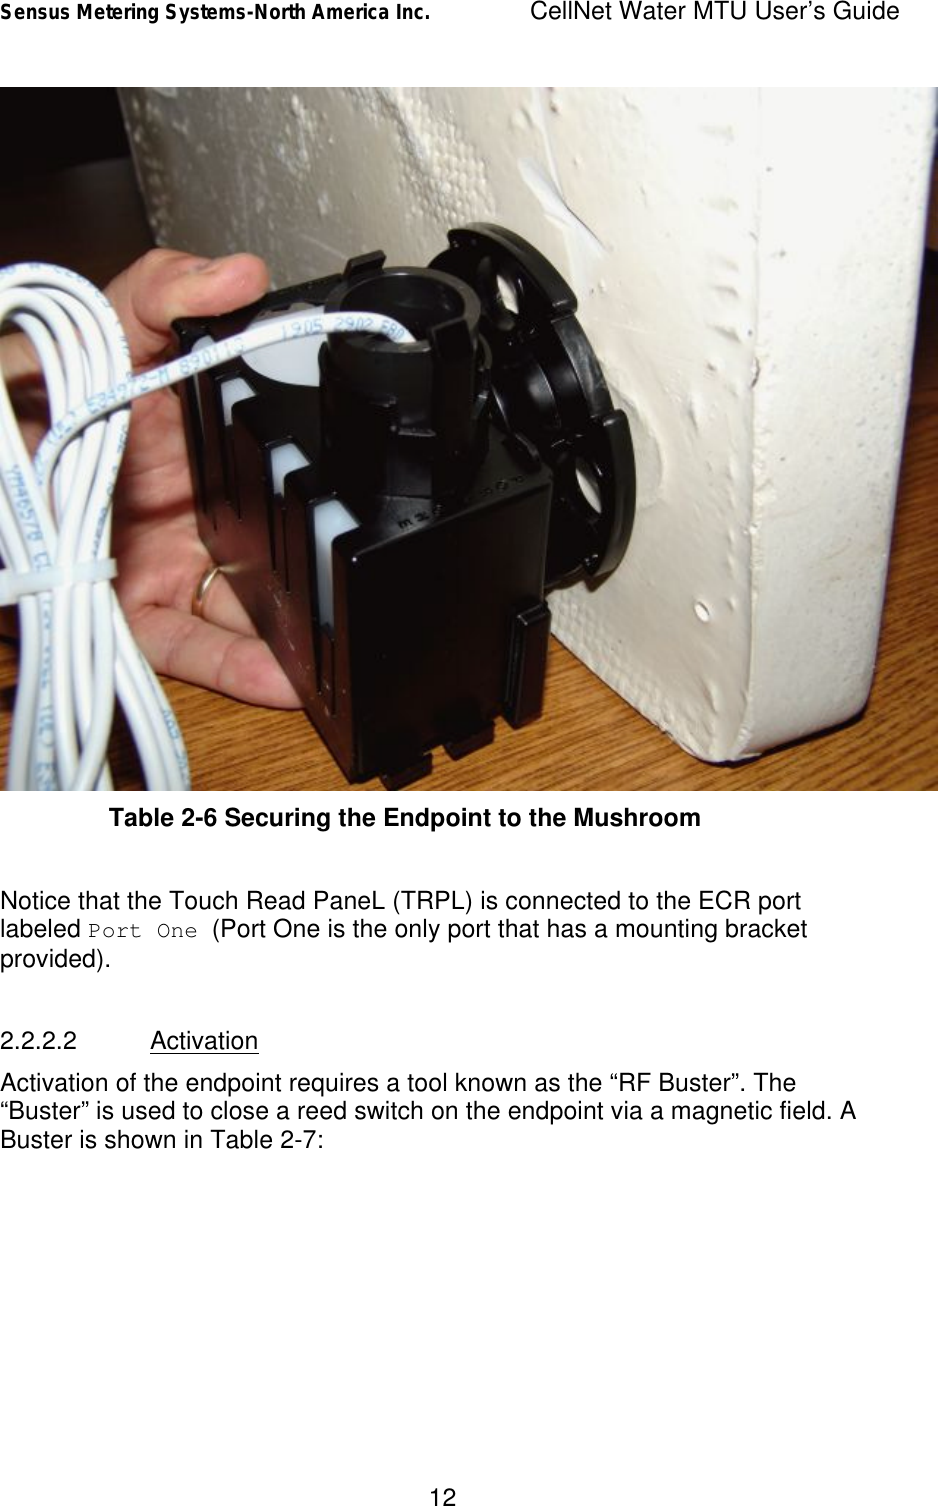 Sensus Metering Systems-North America Inc.    CellNet Water MTU User’s Guide 12  Table 2-6 Securing the Endpoint to the Mushroom  Notice that the Touch Read PaneL (TRPL) is connected to the ECR port labeled Port One (Port One is the only port that has a mounting bracket provided).    2.2.2.2 Activation Activation of the endpoint requires a tool known as the “RF Buster”. The “Buster” is used to close a reed switch on the endpoint via a magnetic field. A Buster is shown in Table 2-7: 